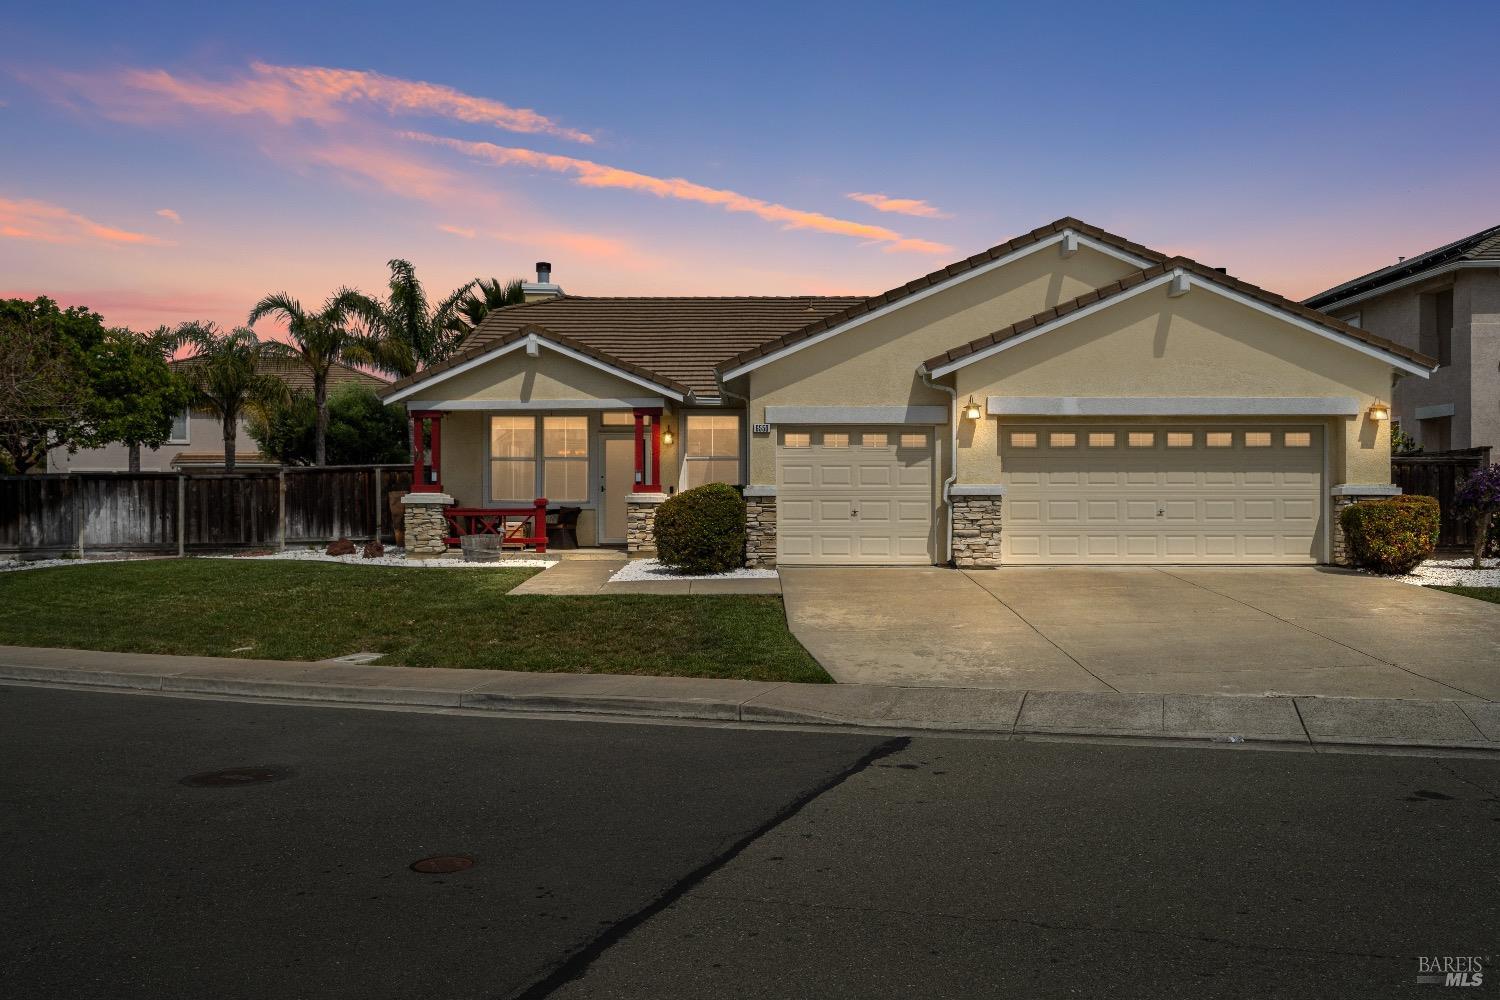 Photo of 6550 Greenbrier Ct in Vallejo, CA